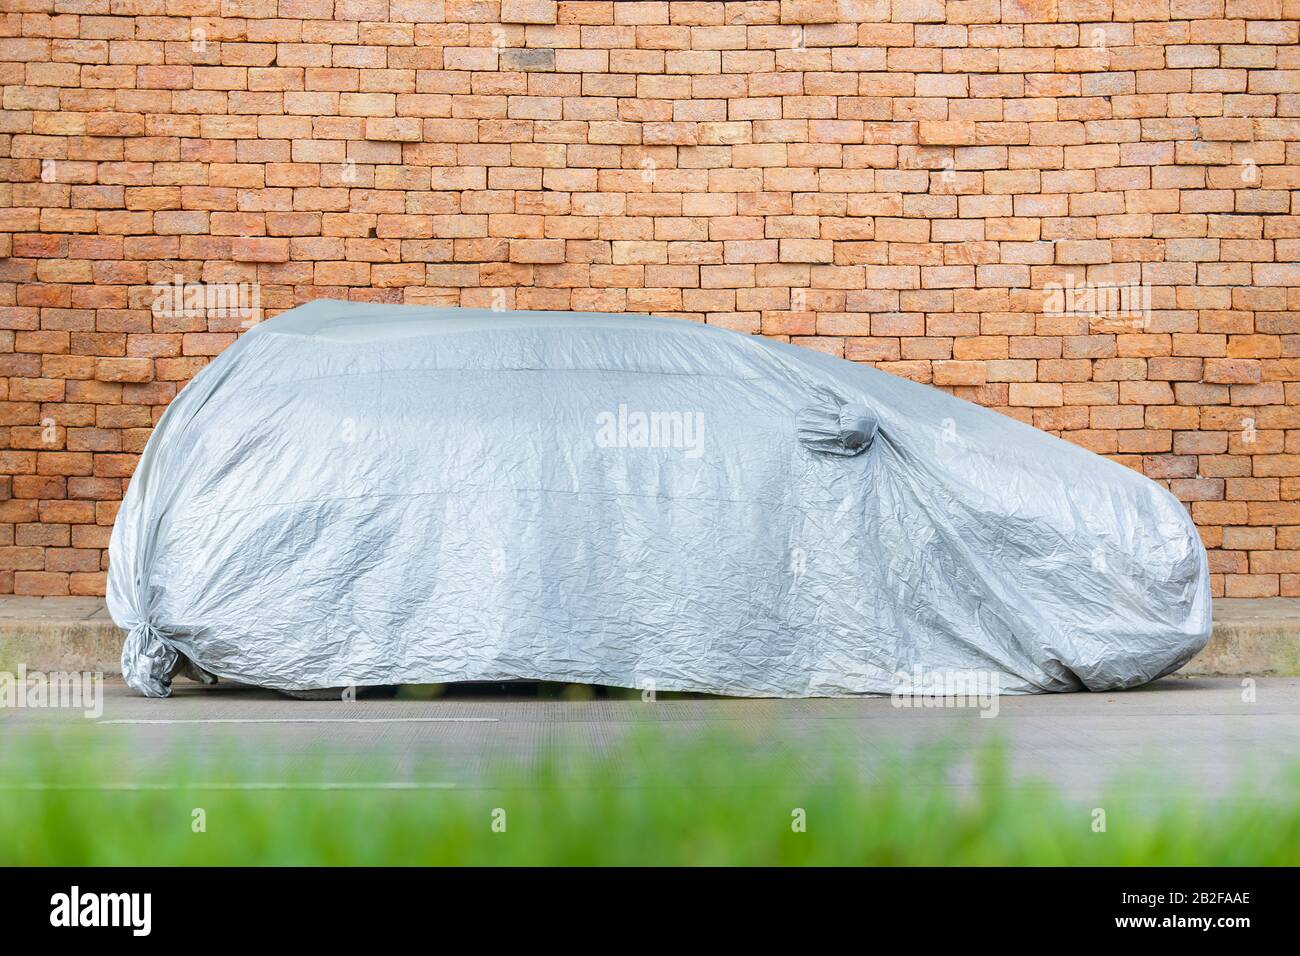 Car covering by silver fabric parking on the road. Car protection concept Stock Photo